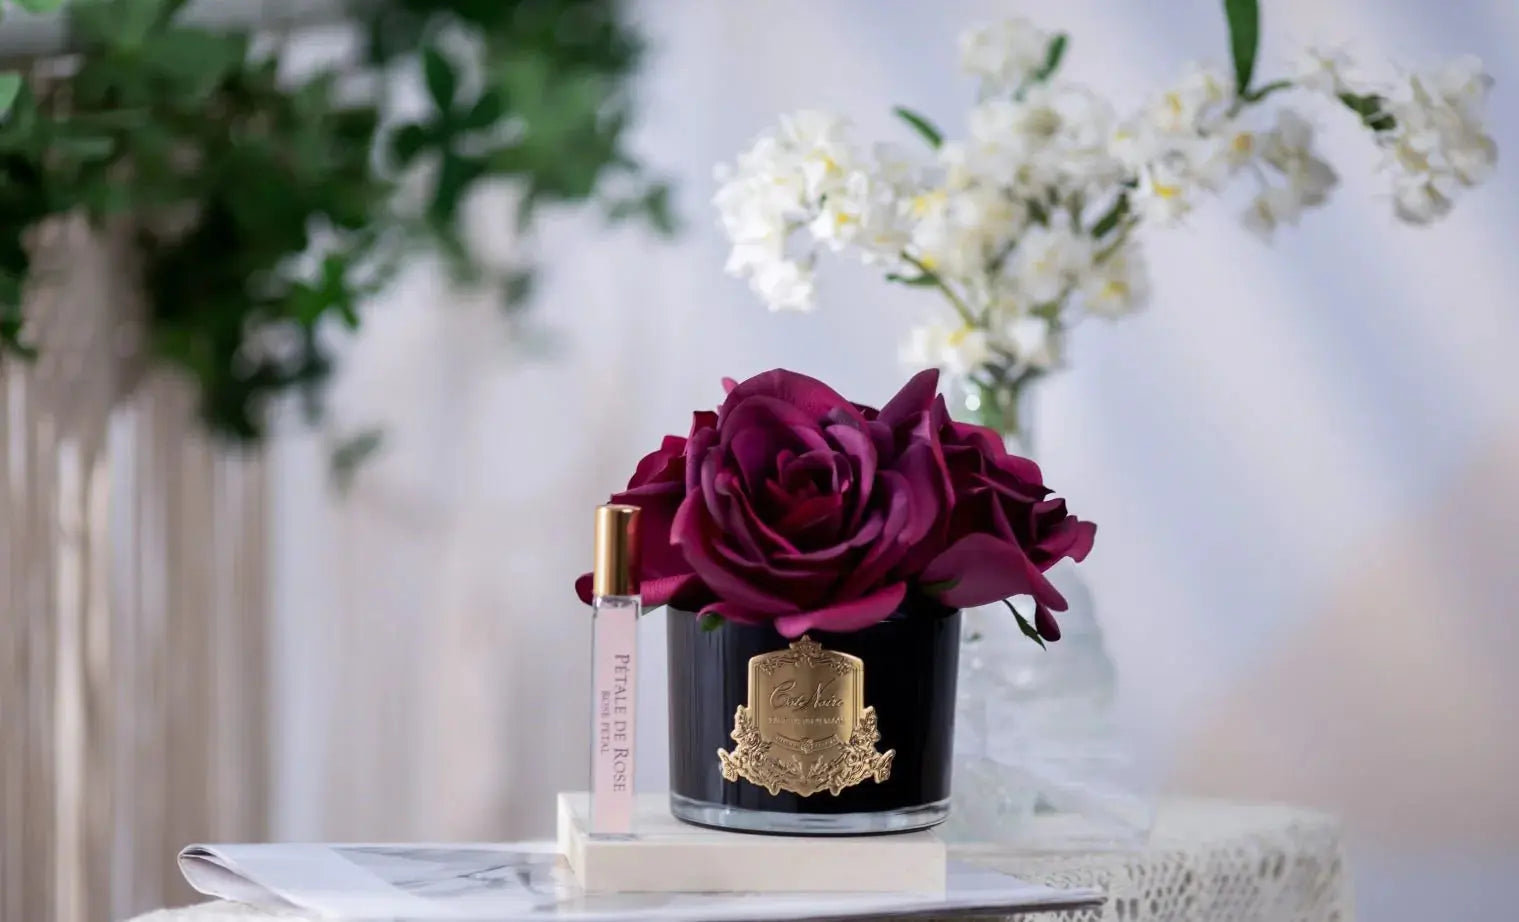 The image features a sophisticated product presentation on a marble table, bathed in soft, natural light. In the foreground, a black glass vase with a golden crest holds a large, lush deep red rose. Beside the vase is a sleek perfume roller with a clear body and a golden cap, labeled "Petale De Rose." In the background, a small vase filled with white flowers adds a delicate touch to the composition.